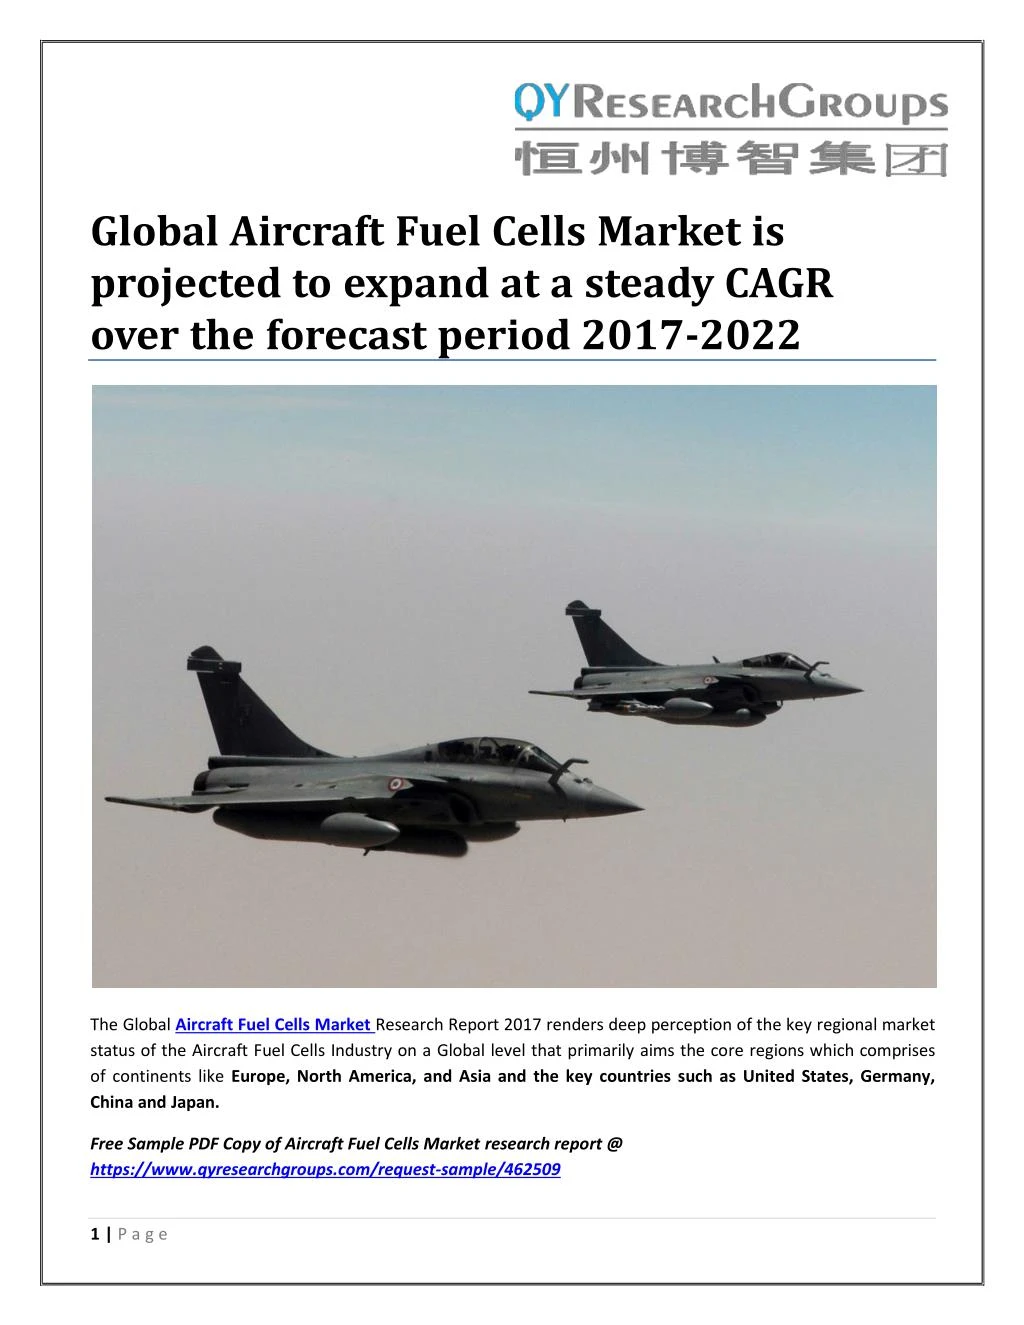 global aircraft fuel cells market is projected